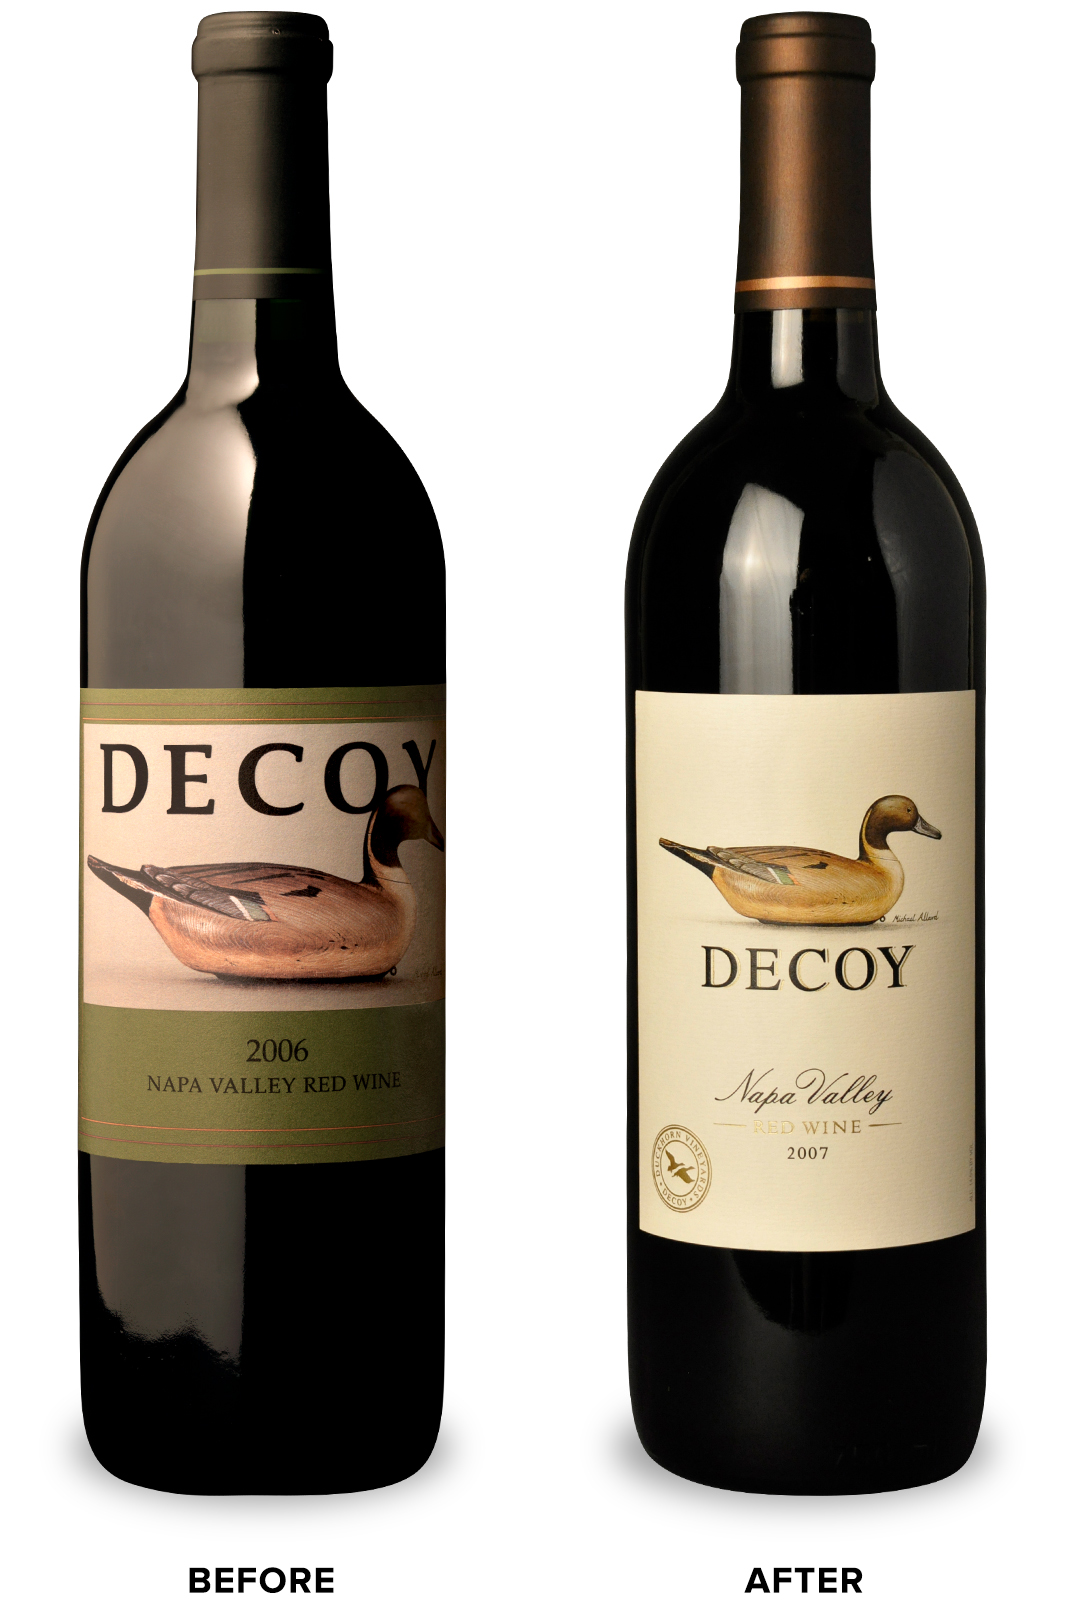 Duckhorn Vineyards Decoy Wine Packaging Before Redesign on Left & After on Right